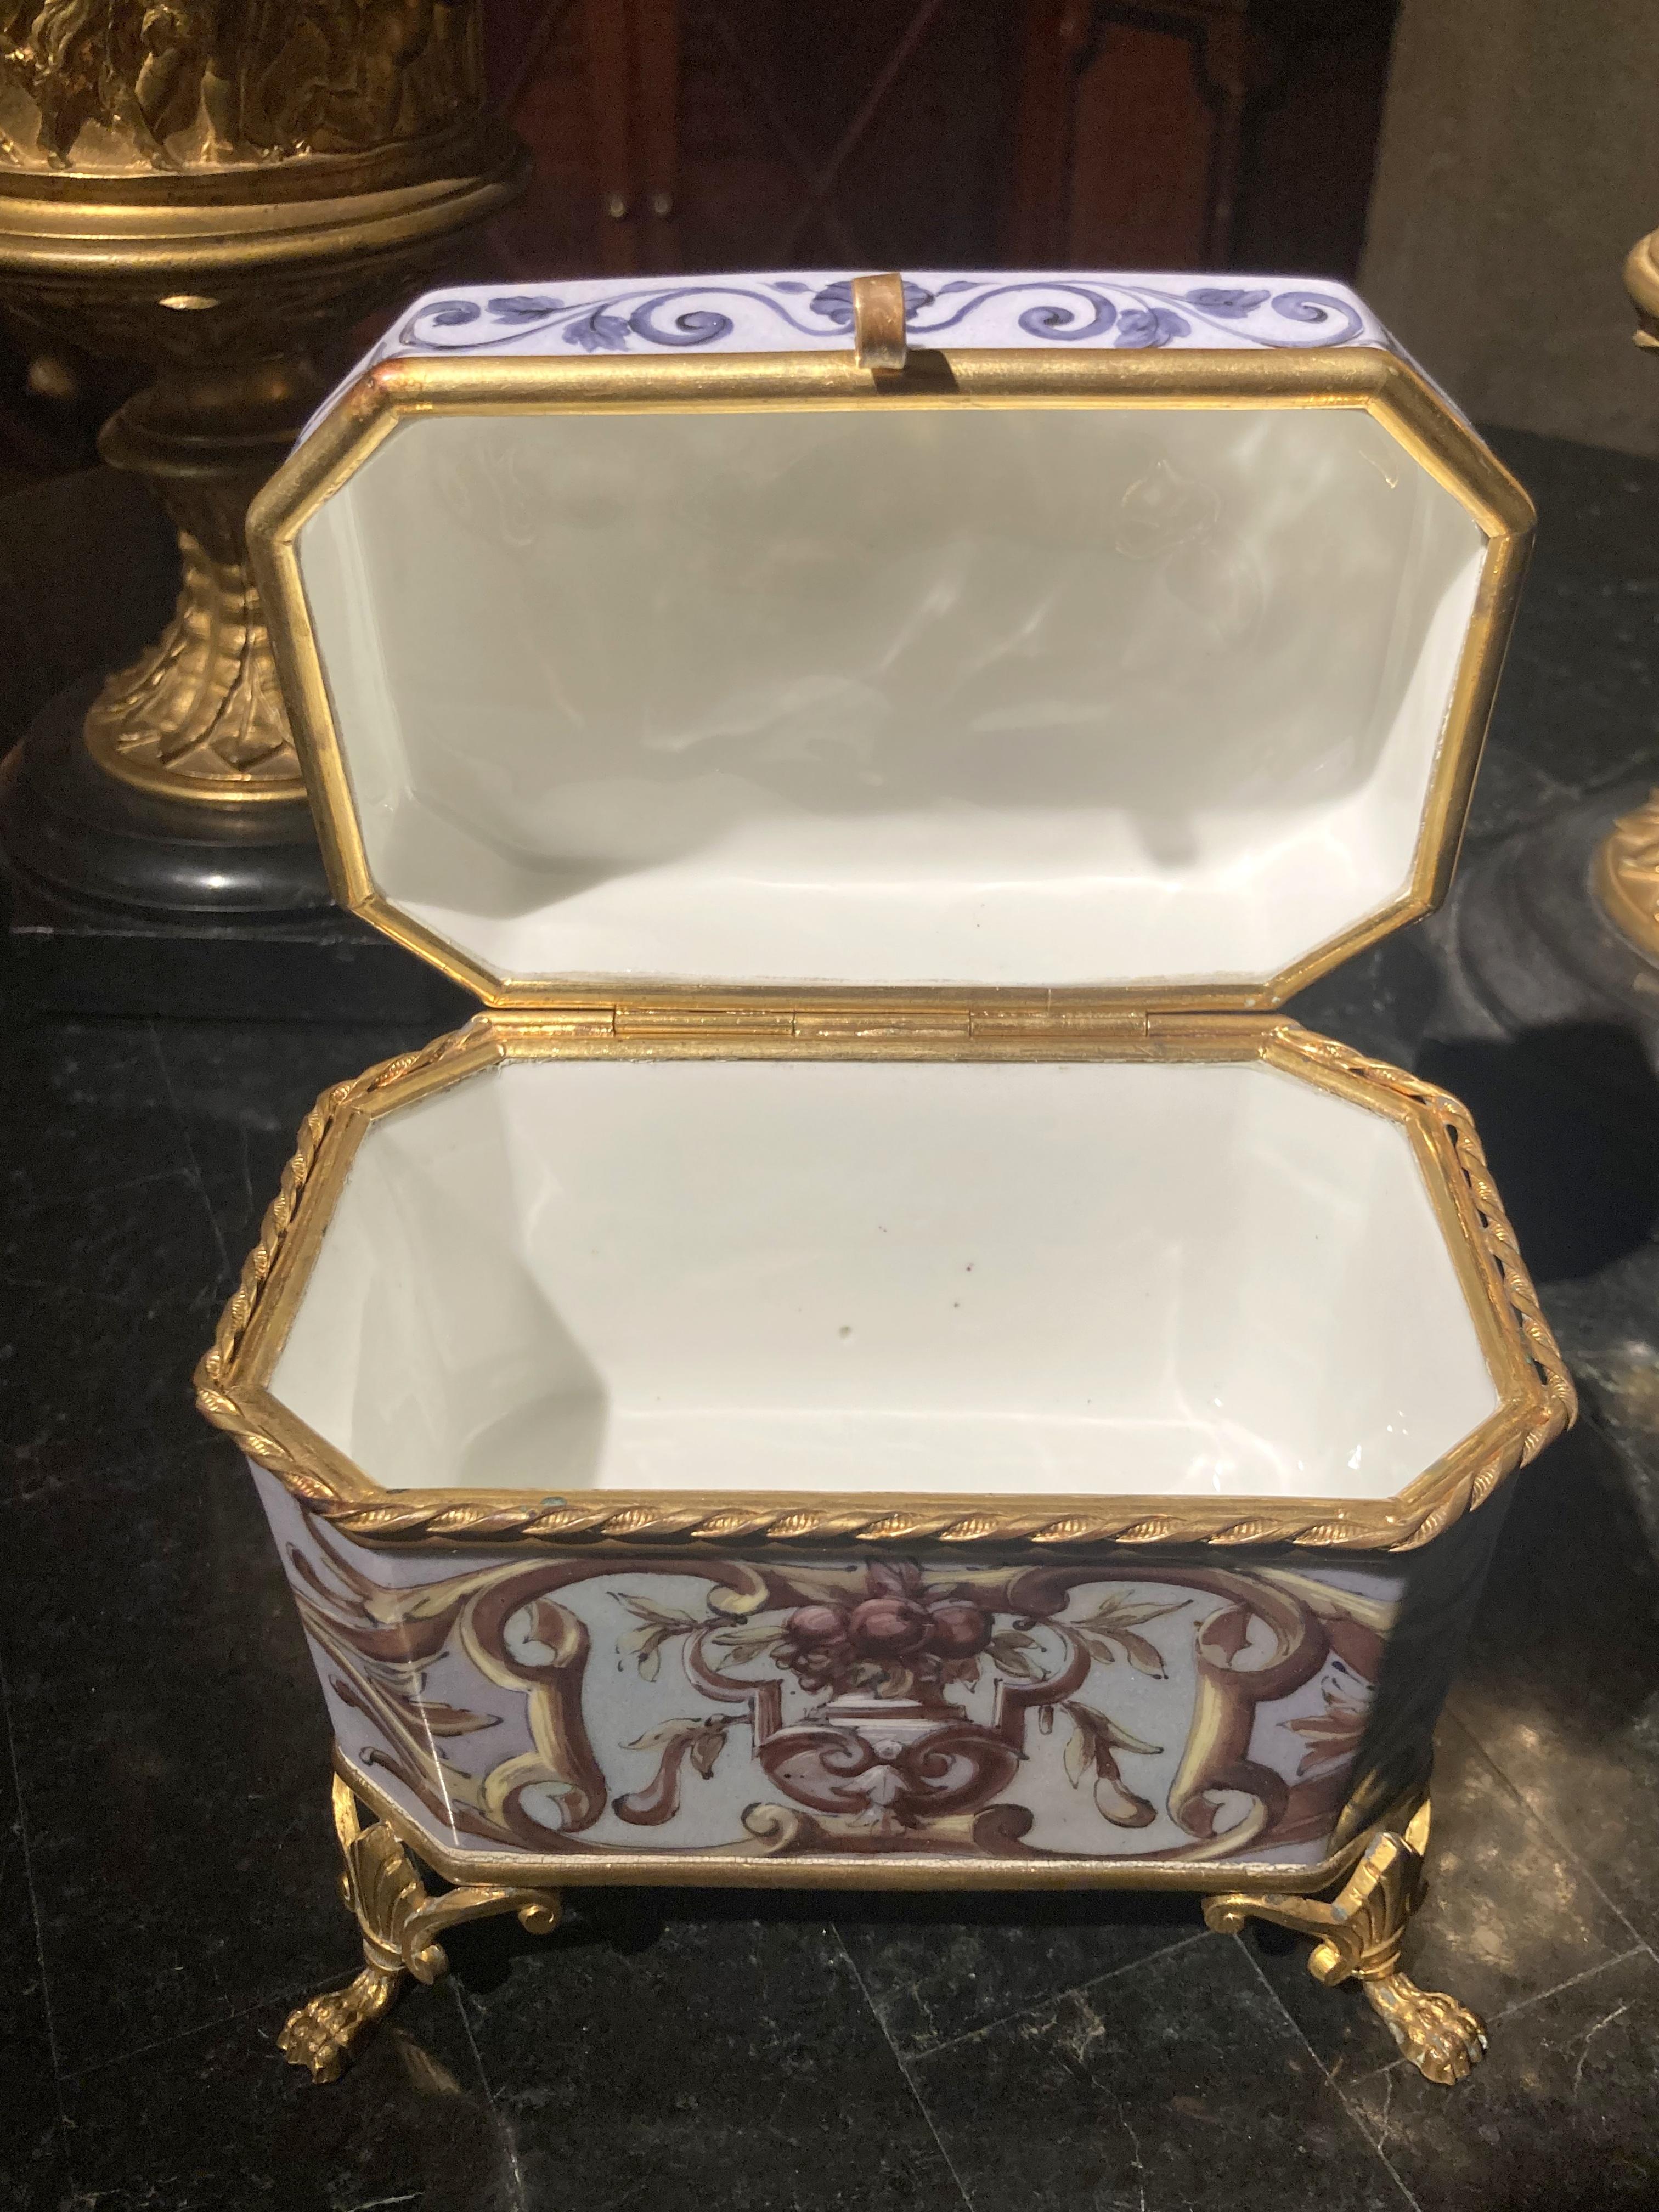 French 19th Century Empire Porcelain and Gilt Bronze Decorative Jewelry Box For Sale 6